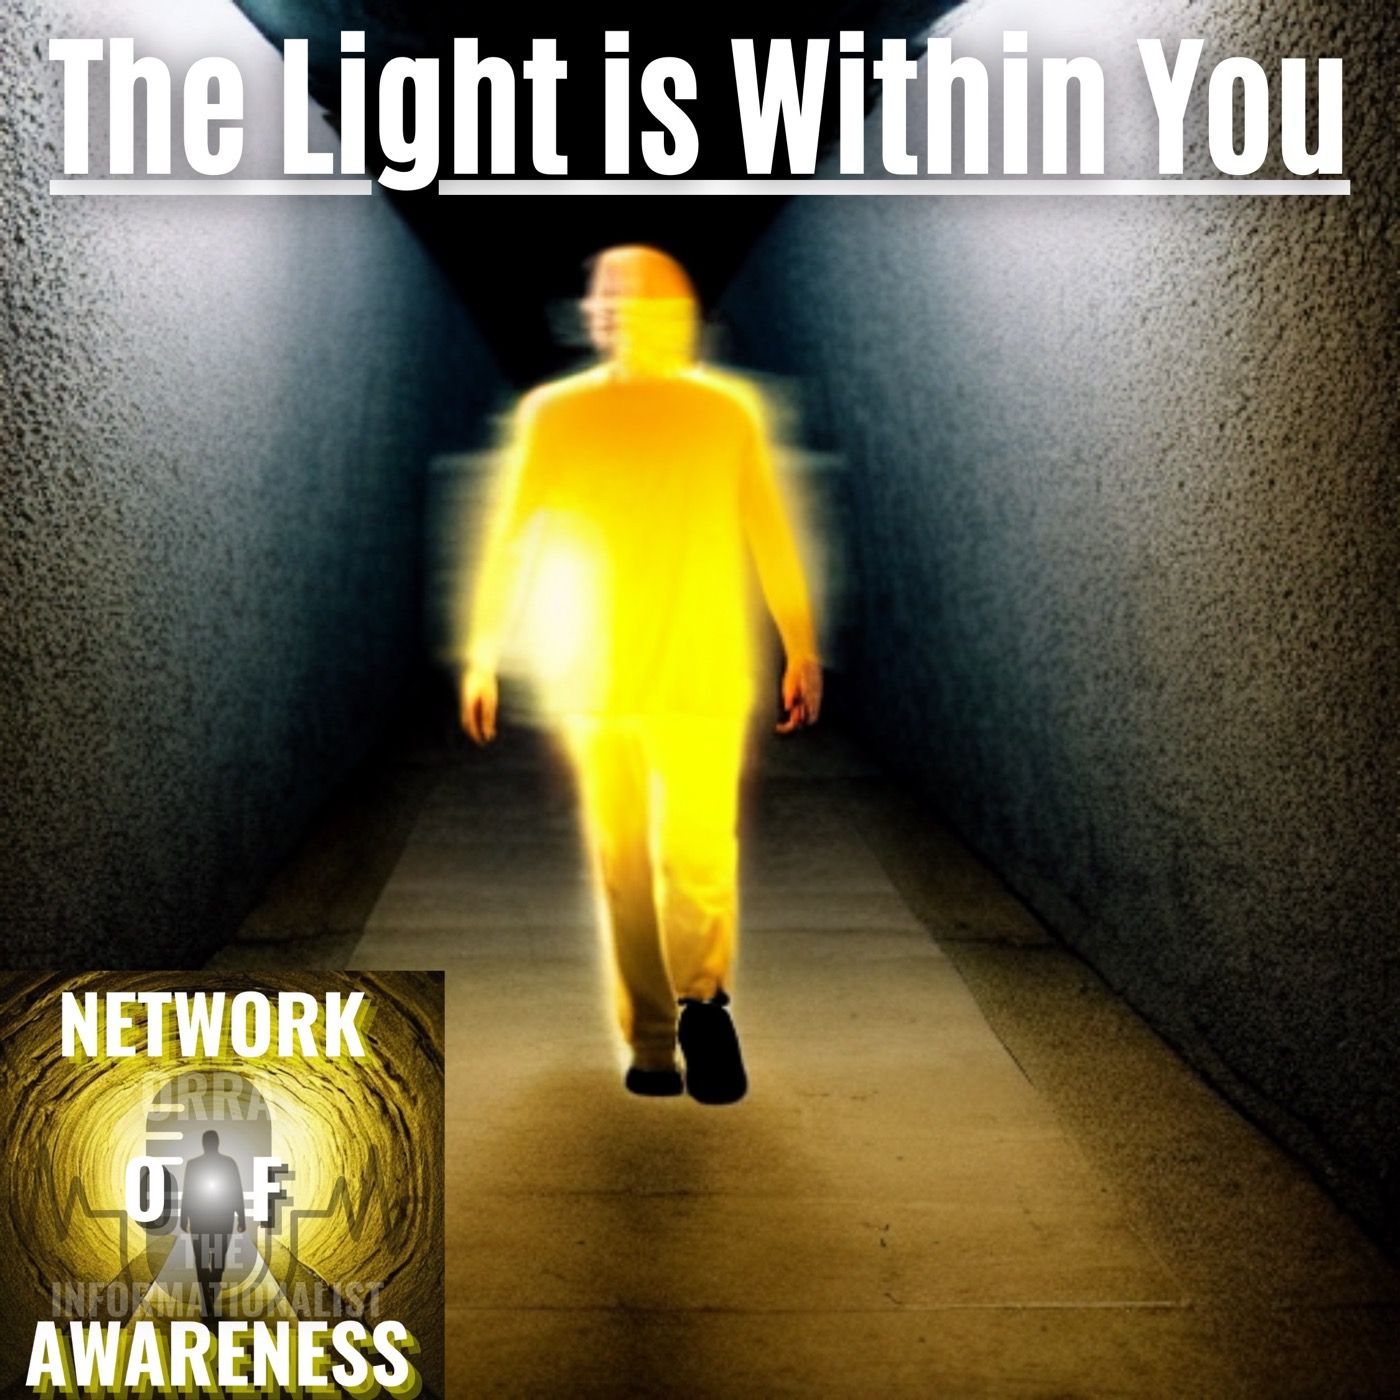 The Light is Within You!